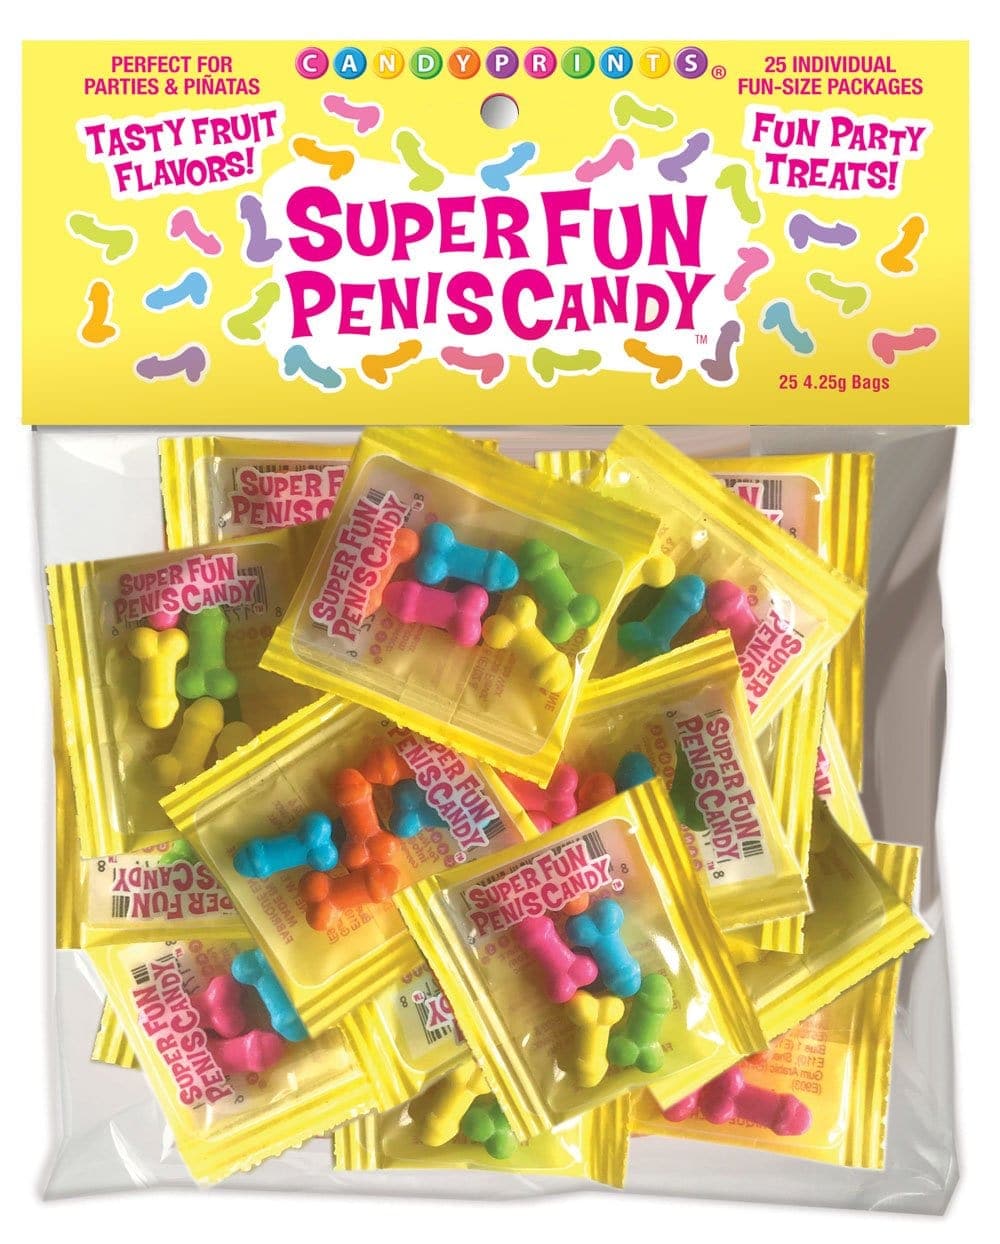 super fun penis candy 25 individual fun size packages